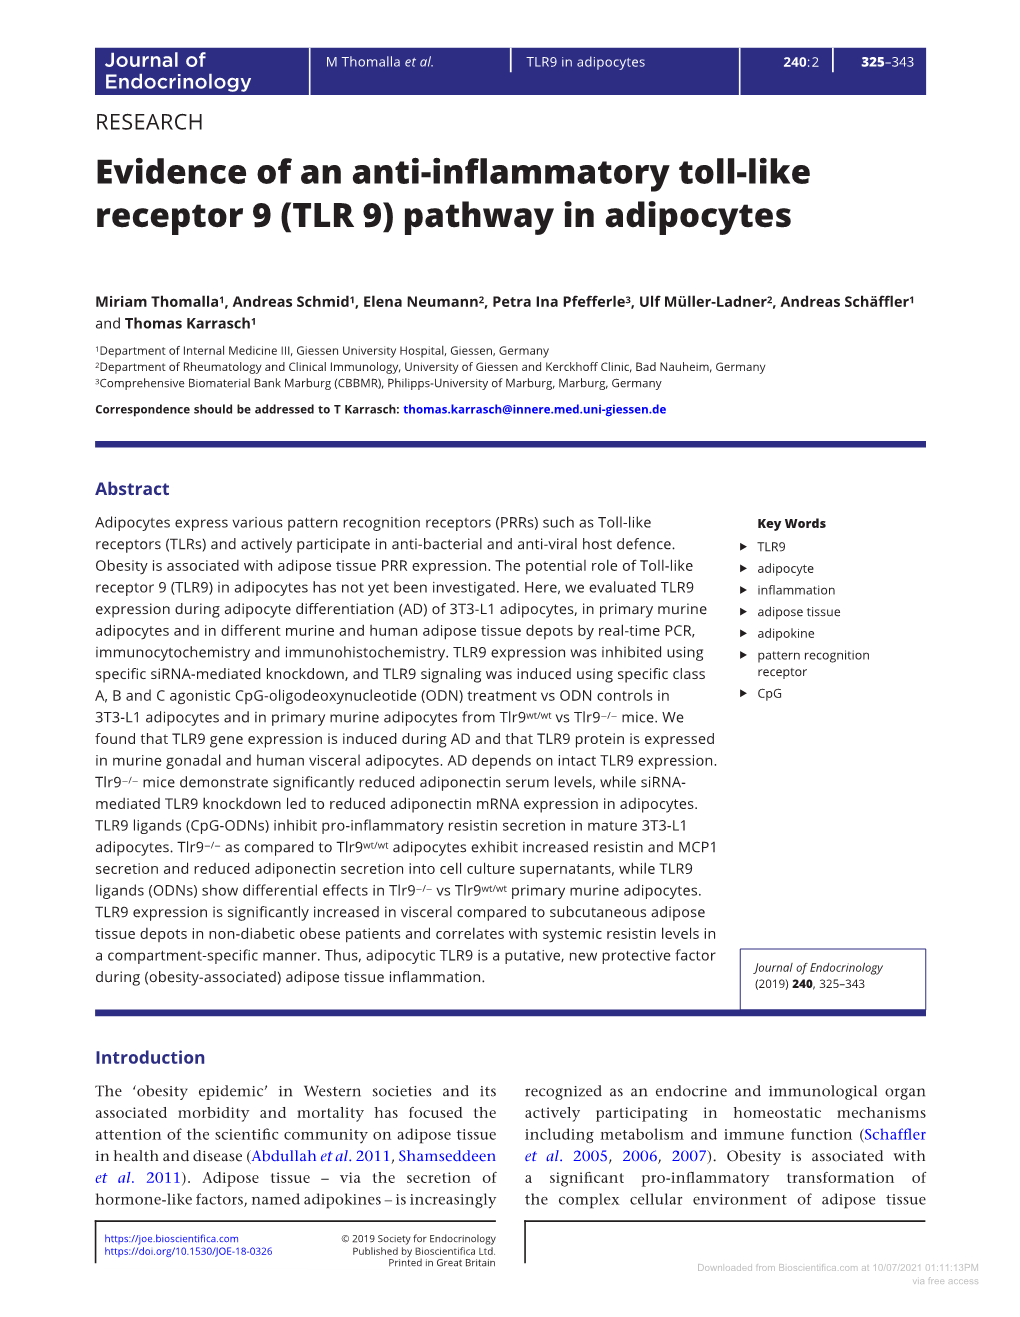 Evidence of an Anti-Inflammatory Toll-Like Receptor 9 (TLR 9) Pathway in Adipocytes